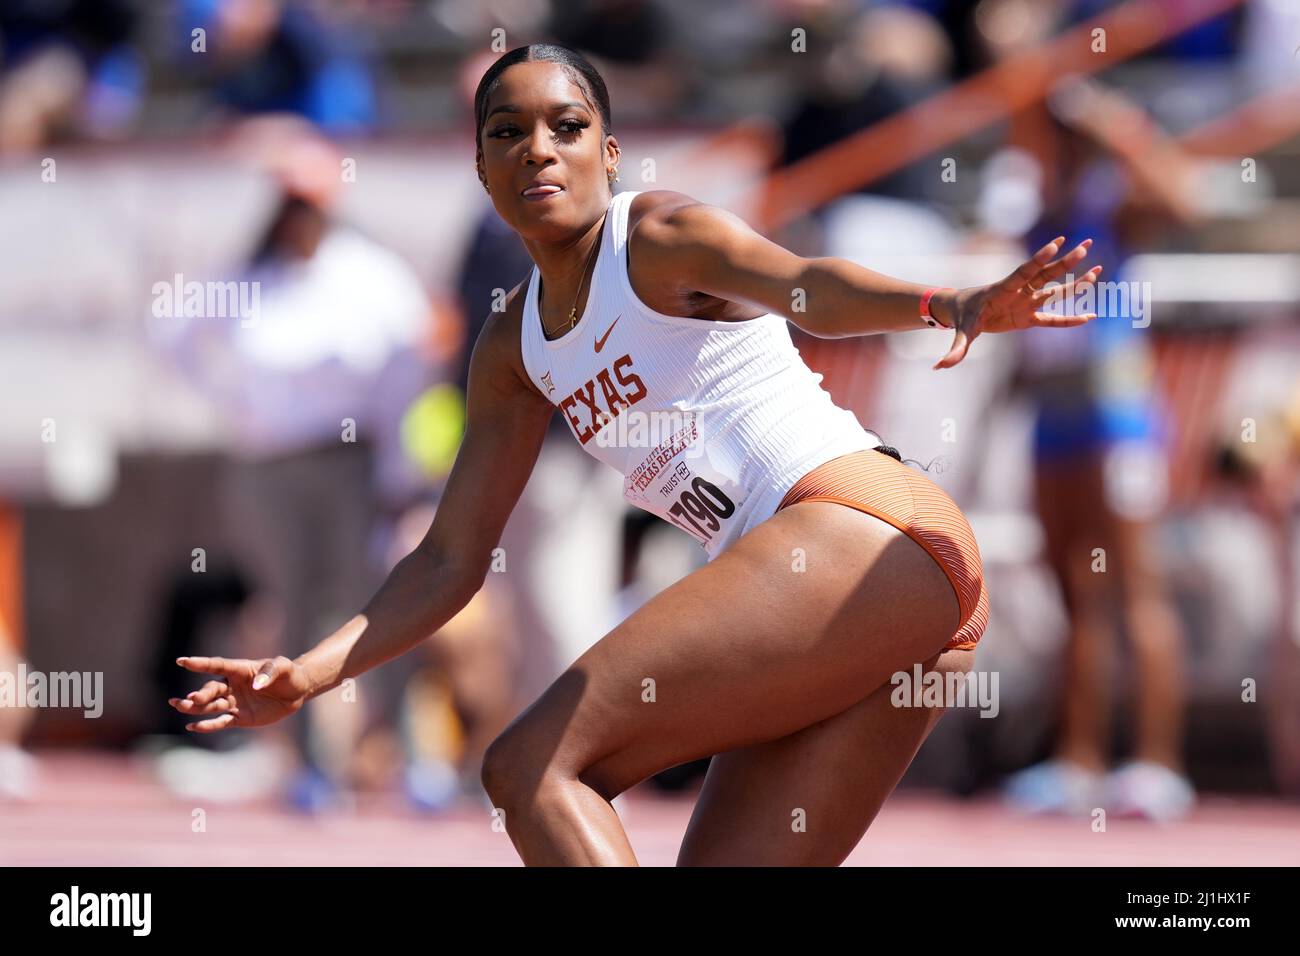 Stacey Ann Williams of Texas prepares to take the handoff in the womens 4x400m relay during the 94th Clyde Littlefield Texas Relays, Friday, Mar 25, 2022, in Austin